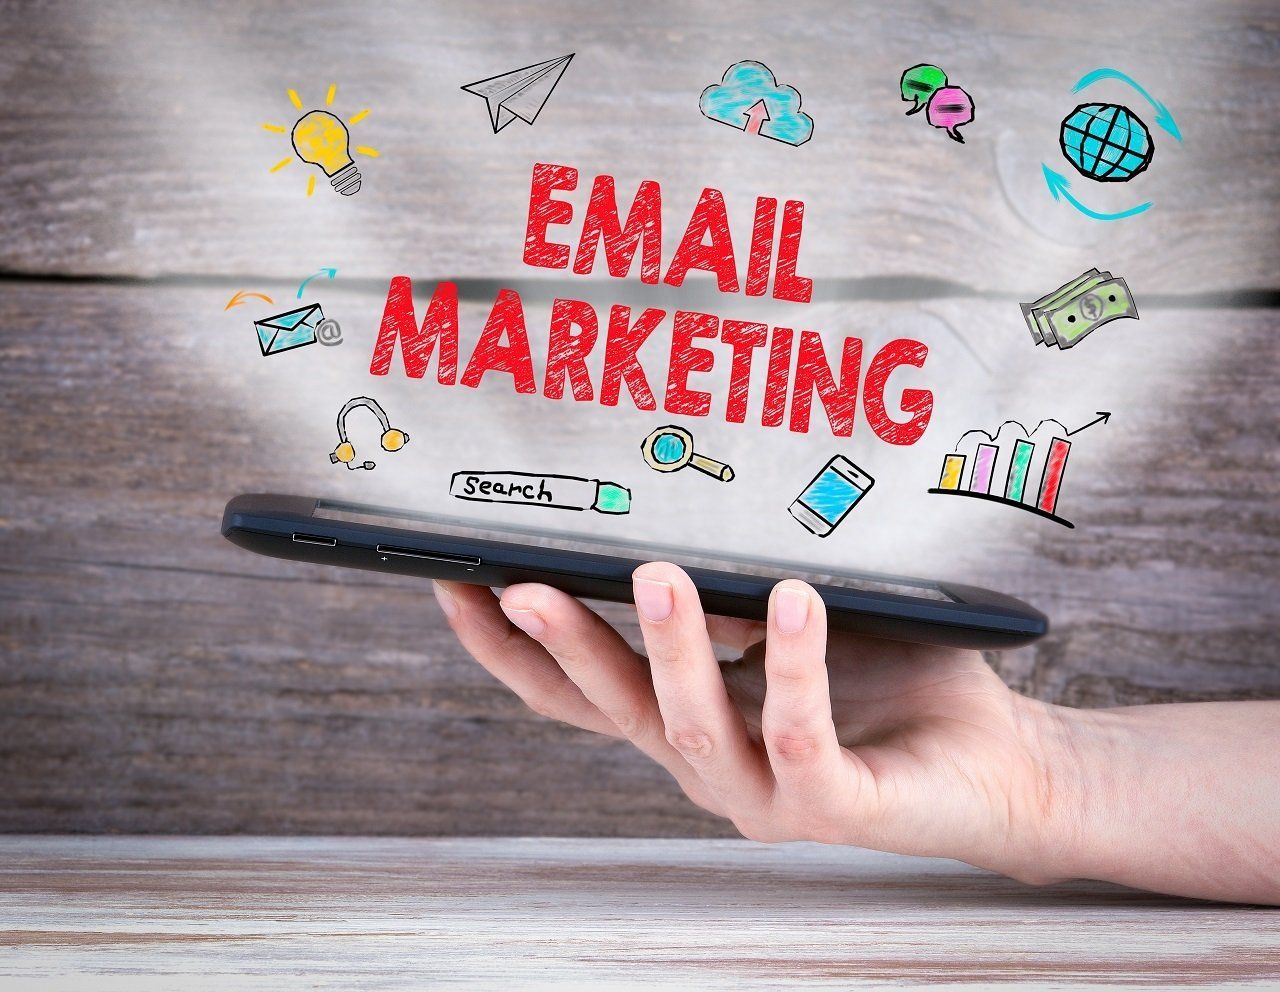 Should Your Law Firm Use Email Marketing? Here Are 5 Reasons Why Your Firm Should